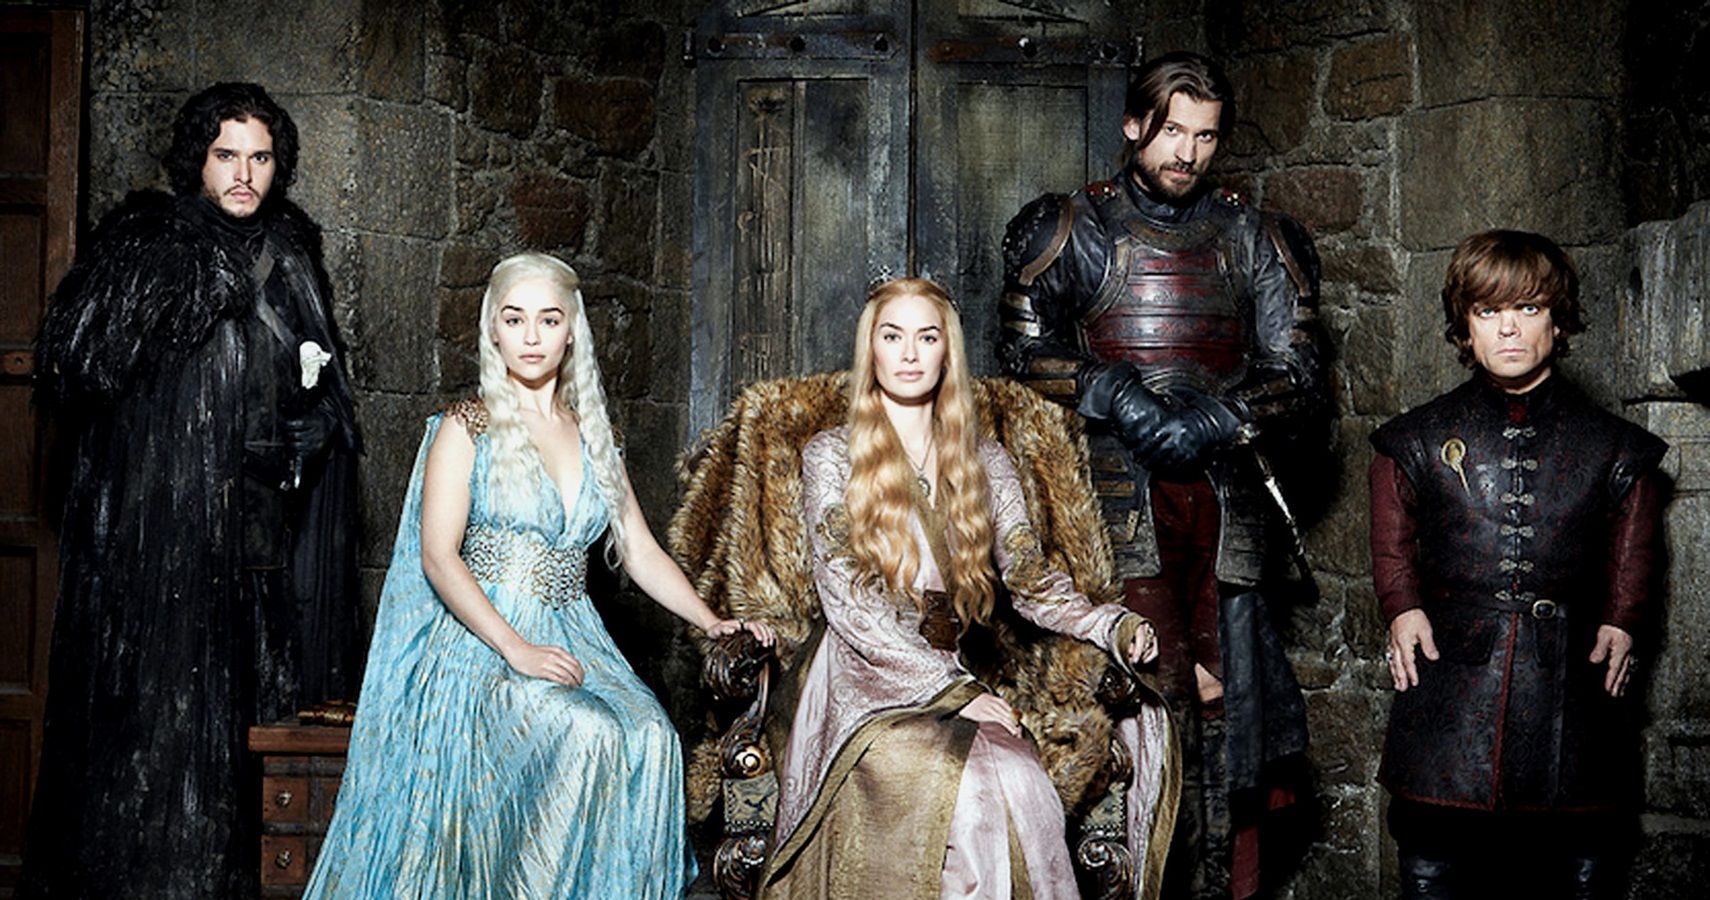 10 Characters From Game of Thrones That Deserved Better